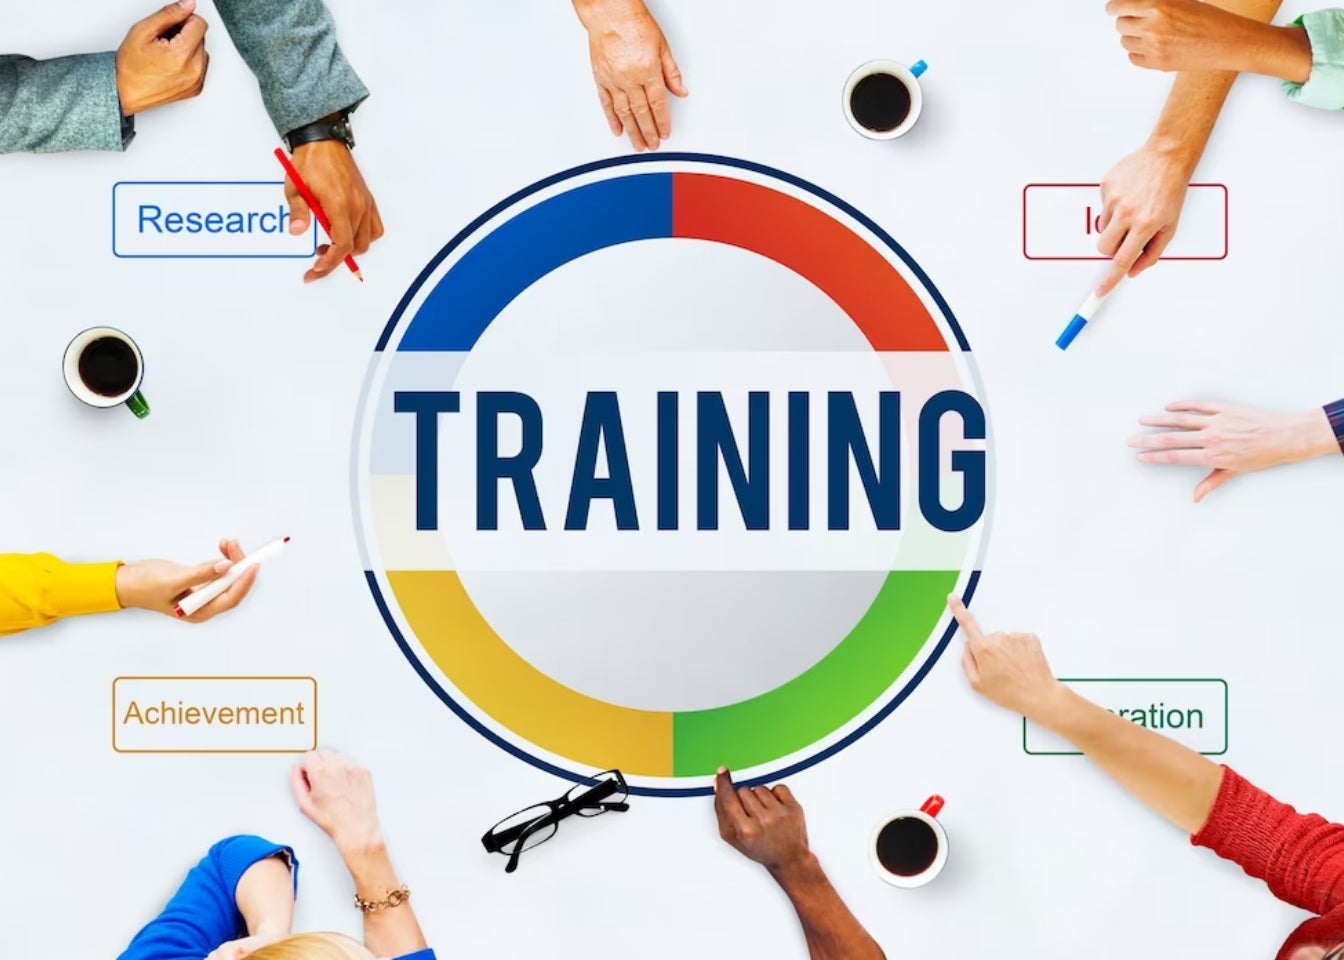 Provide training sessions and materials to the community group members to ensure they are knowledgeable about the product and its features. Offer ongoing support for any queries or technical assistance they may require.